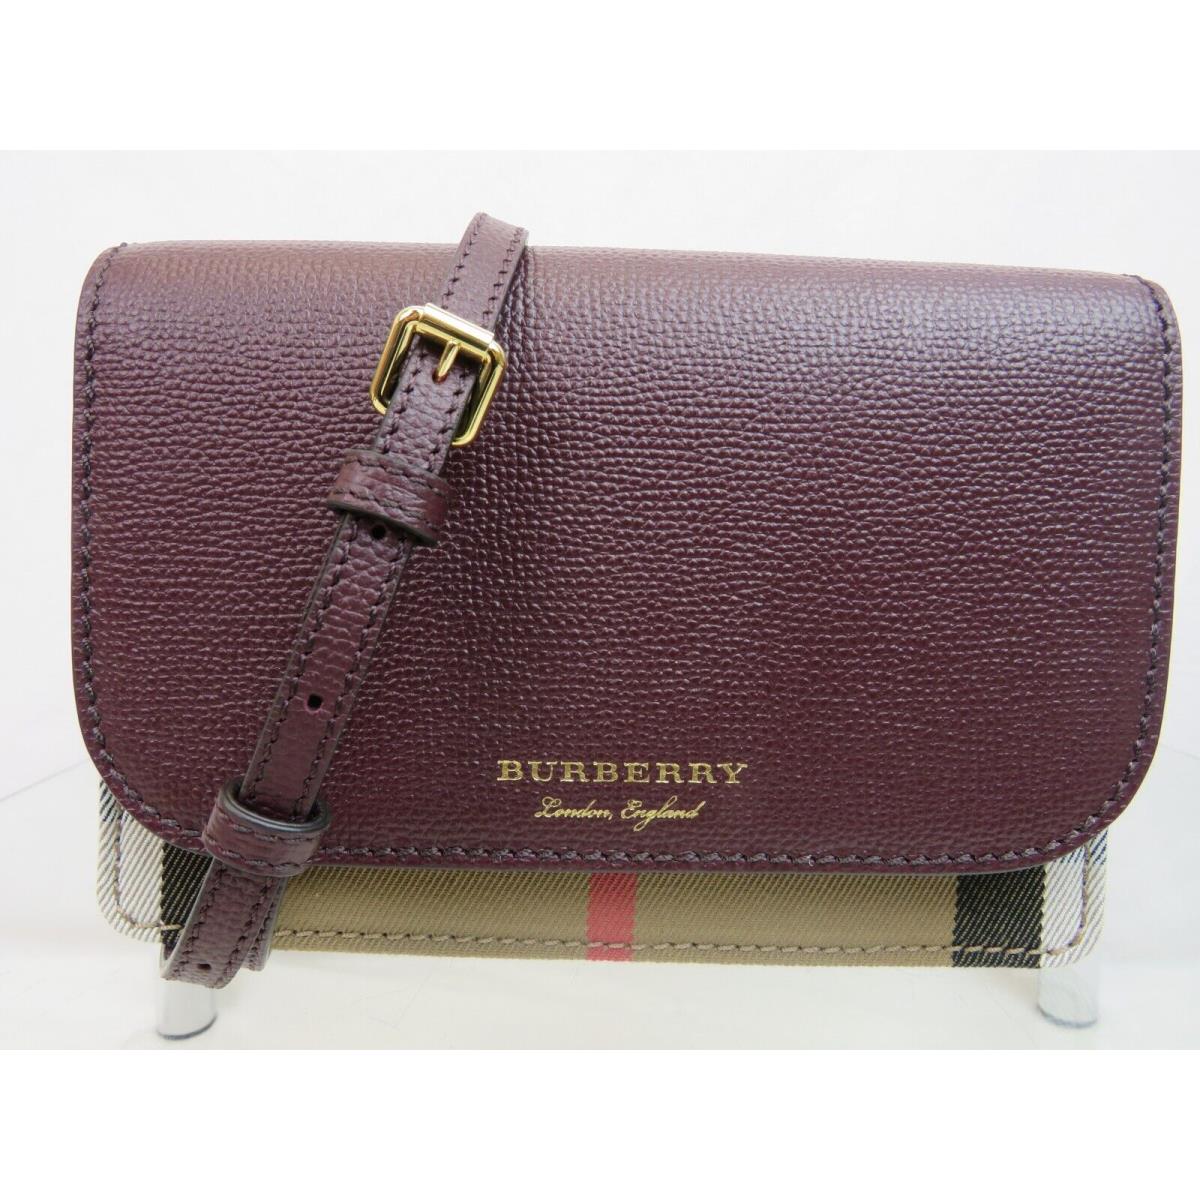 Burberry Hampshire Burgundy Leather House Check Small Crossbody Clutch Bag